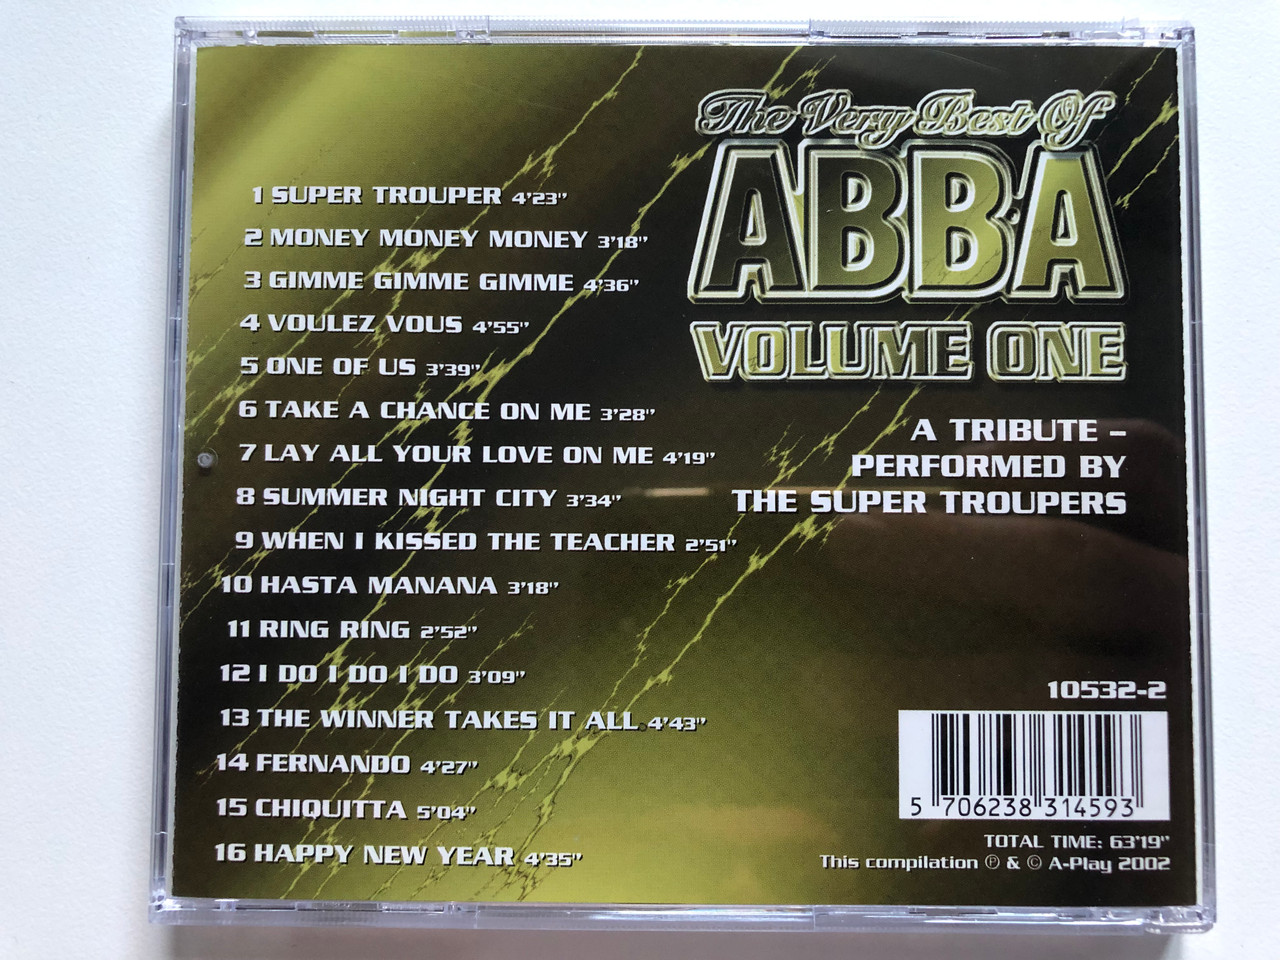 https://cdn10.bigcommerce.com/s-62bdpkt7pb/products/0/images/228490/The_Very_Best_of_Abba_-_Volume_One_-_A_Tribute-Performed_By_The_Super_Troupers_Features_Money_Money_Money_Voulez_Vous_Take_A_Chance_On_Me_Fernando_Gimme_Gimme_Gimme_Bellevue_Entertain__38447.1653371747.1280.1280.JPG?c=2&_gl=1*18x2awr*_ga*MjA2NTIxMjE2MC4xNTkwNTEyNTMy*_ga_WS2VZYPC6G*MTY1MzM3MTM3Ni40MDguMC4xNjUzMzcxMzc2LjYw